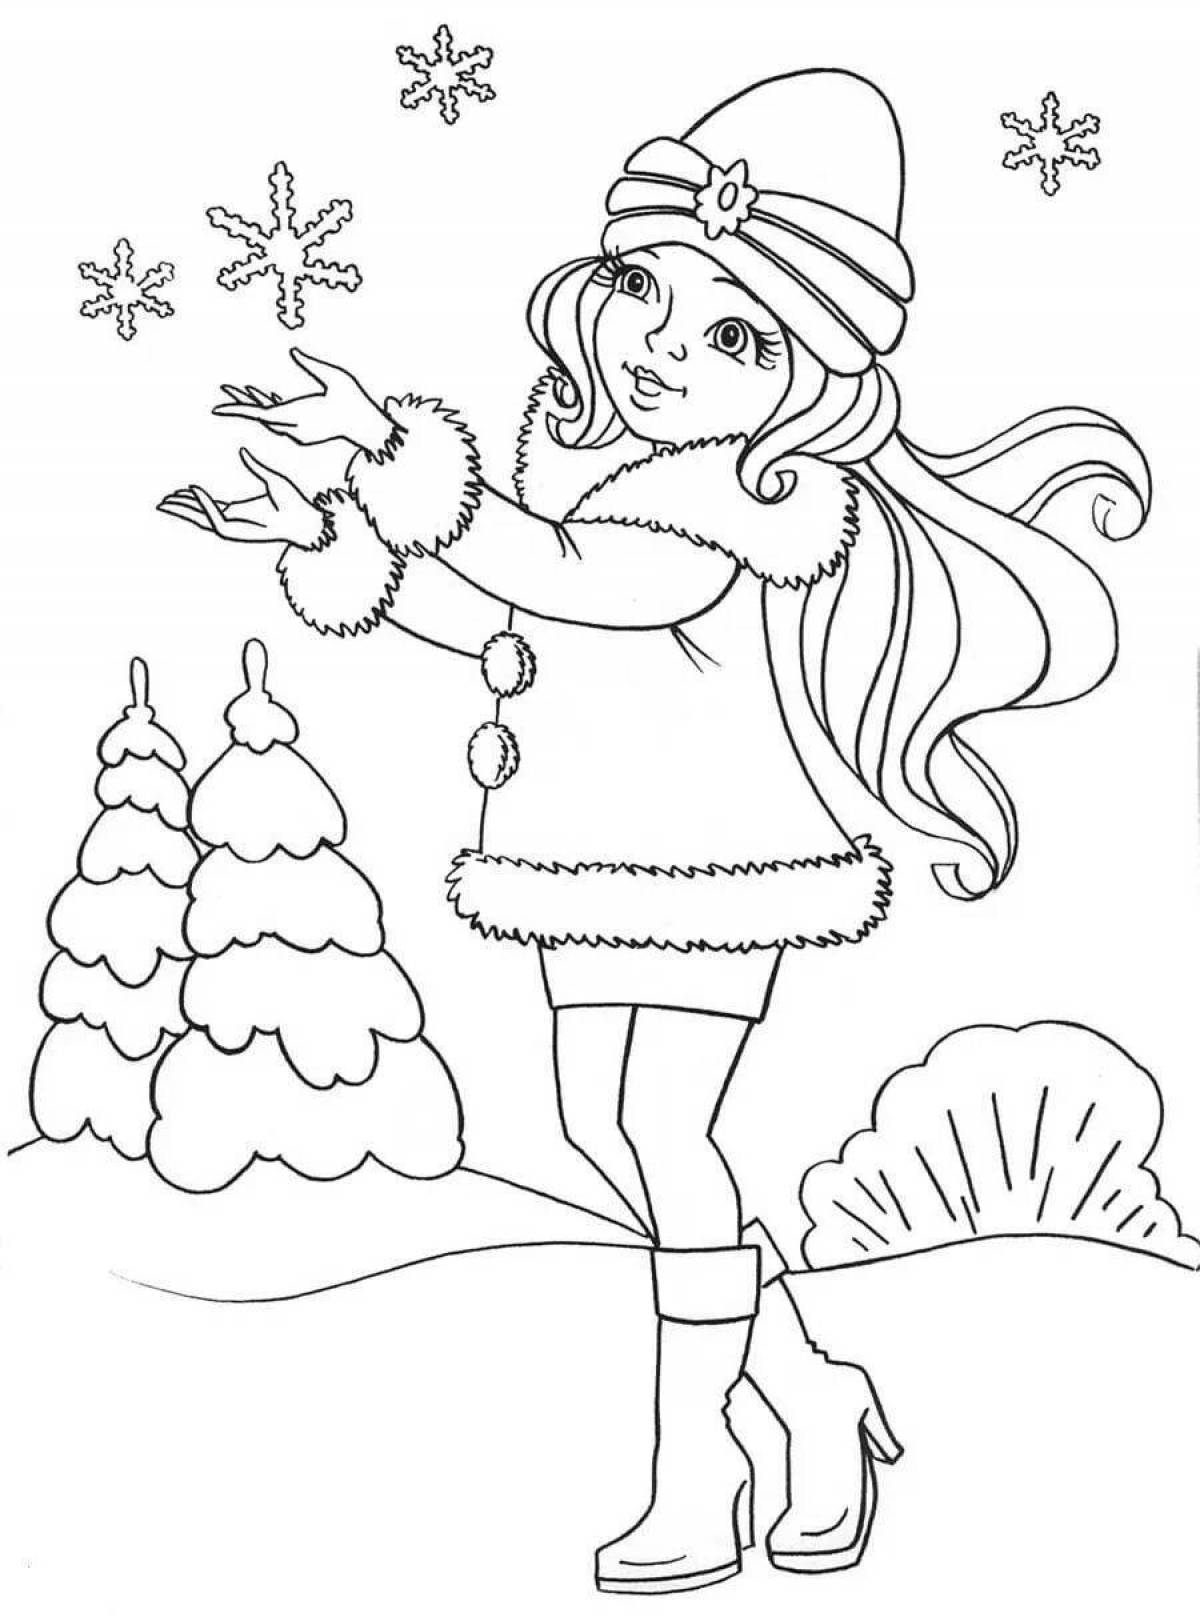 Delightful winter coloring book for children 8 years old